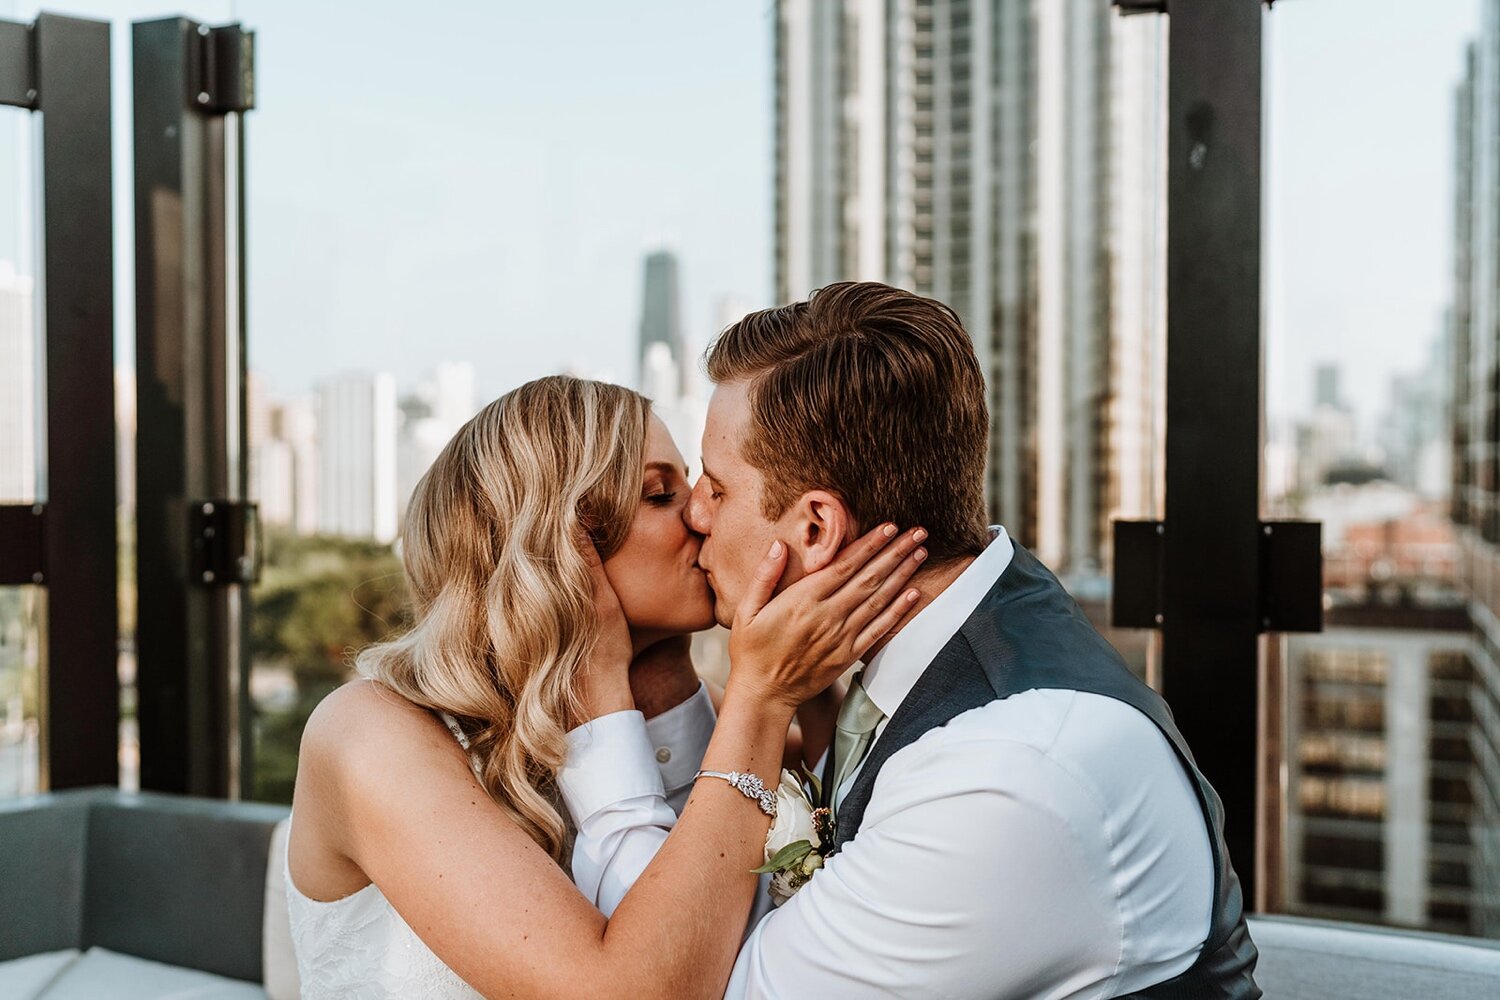 Bride and groom kiss at intimate Chicago elopement